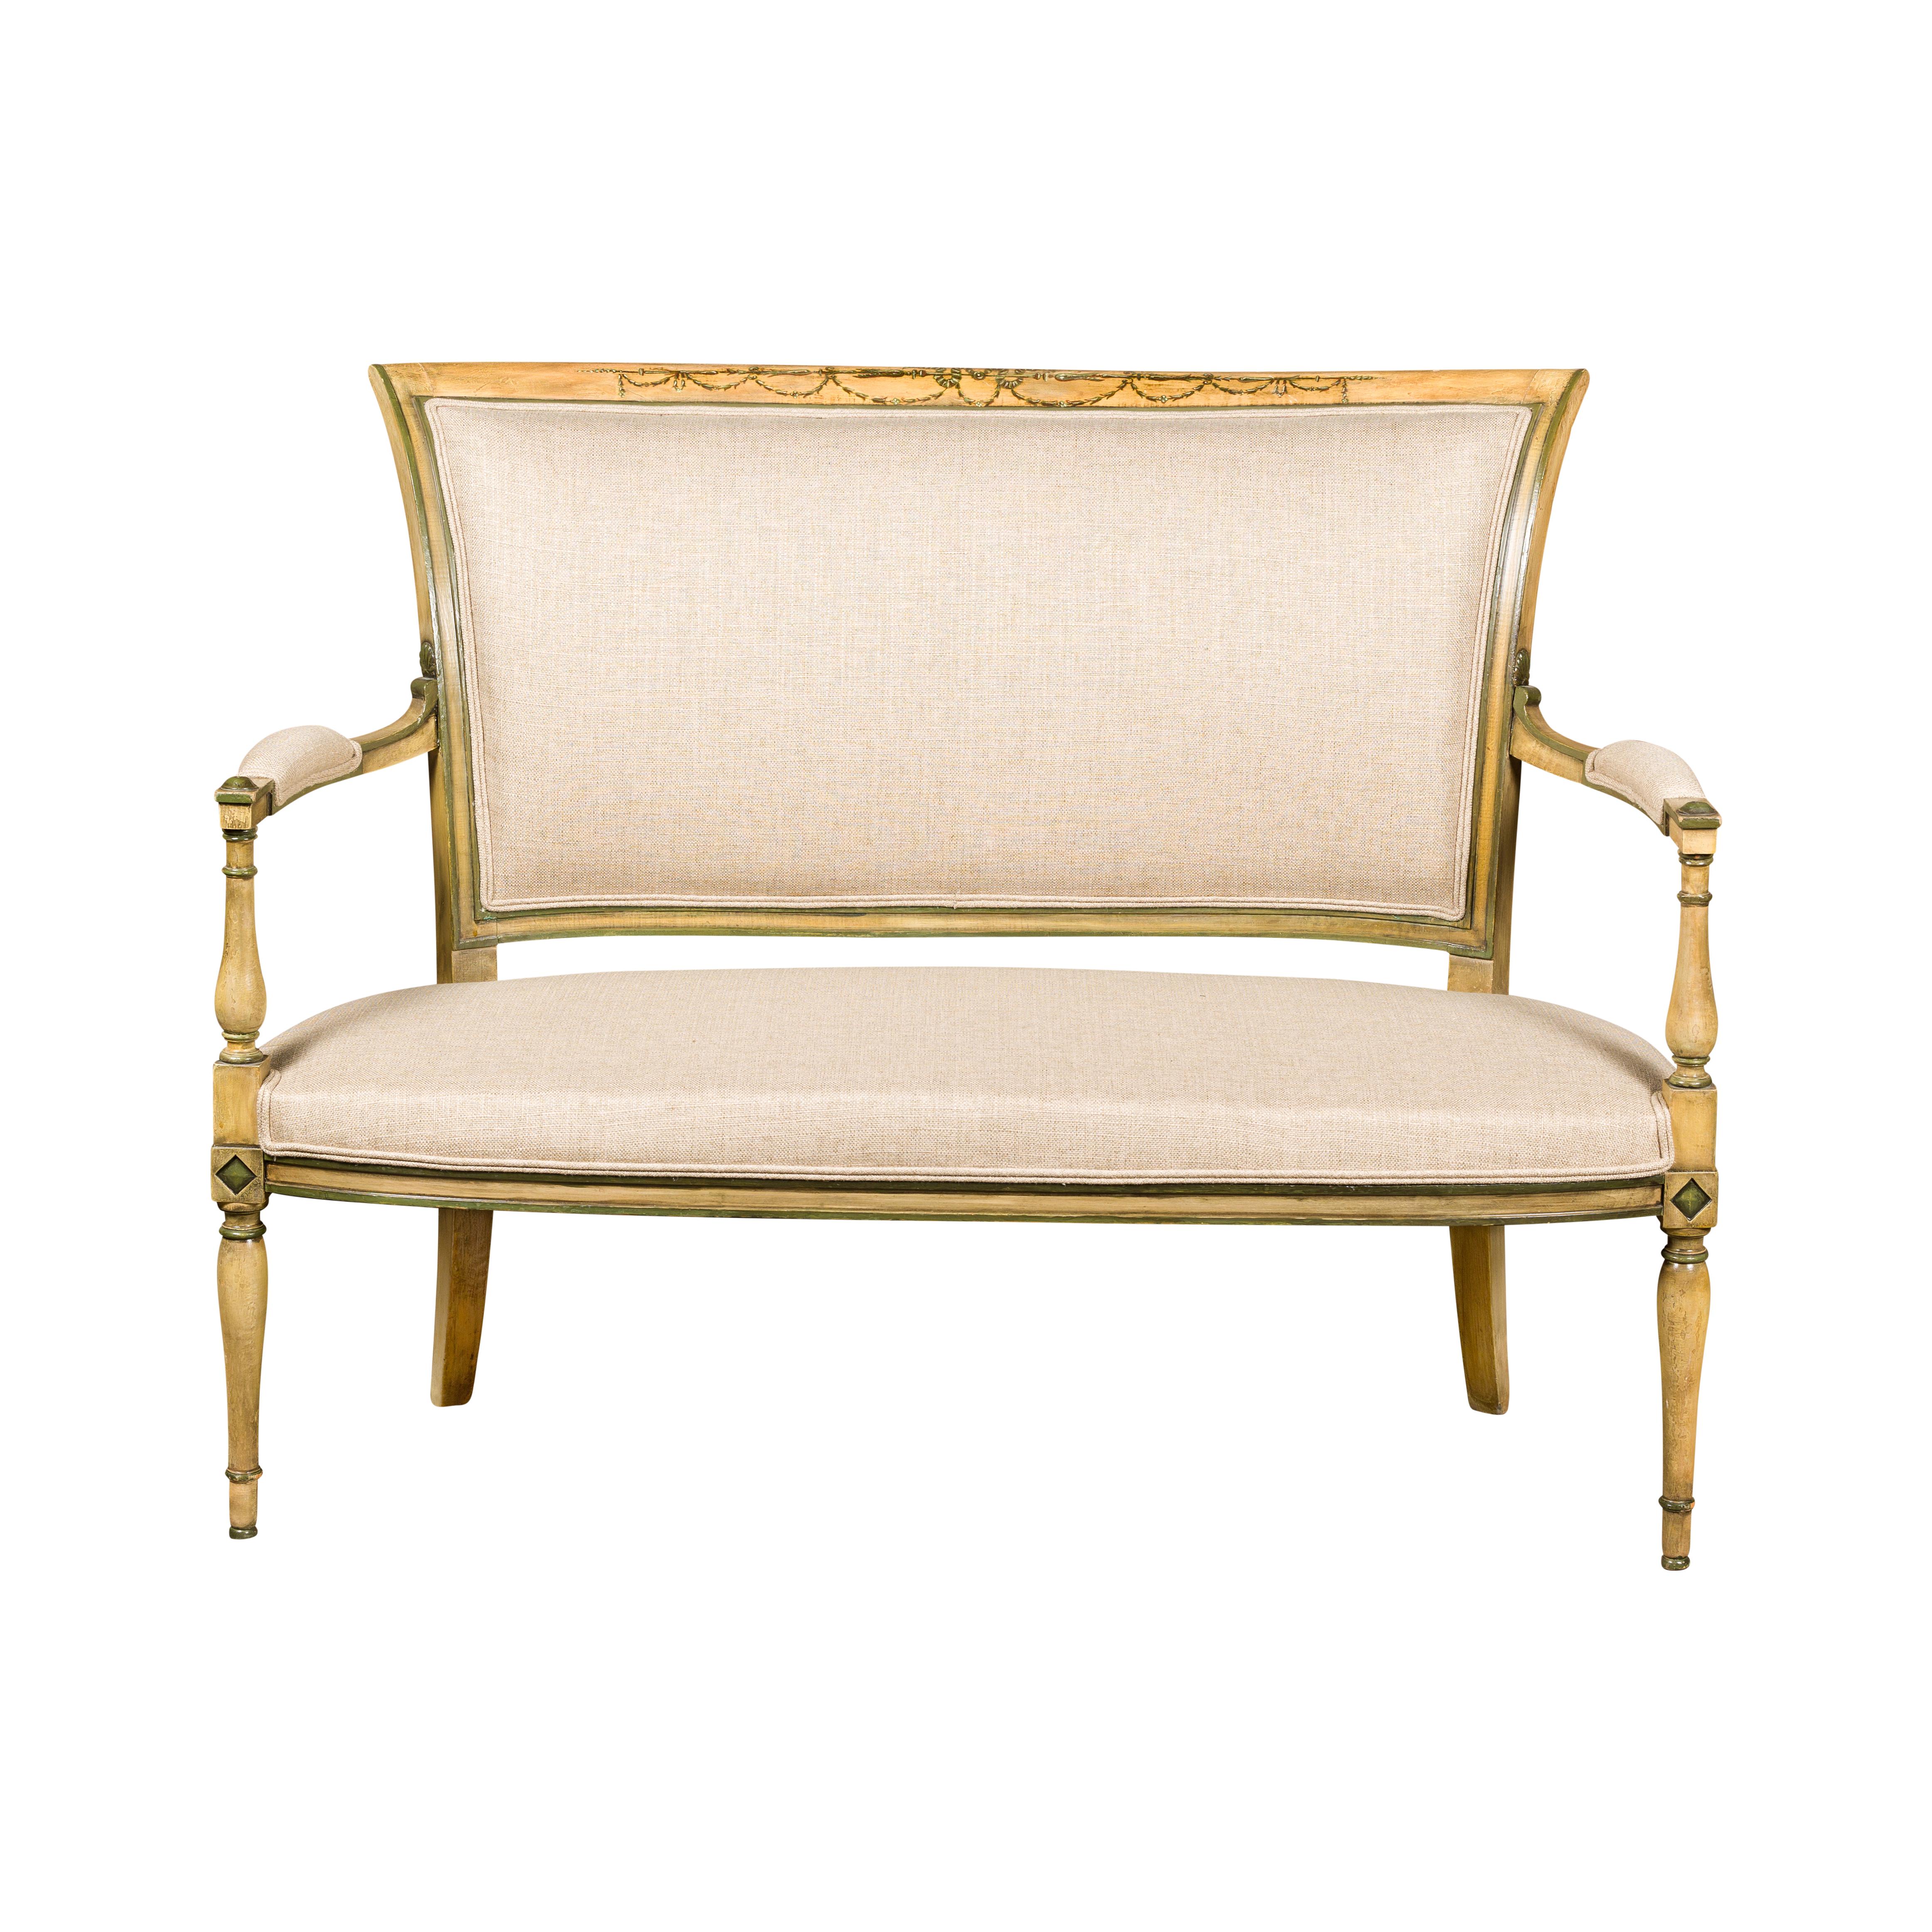 French Directoire Settee with Painted Garlands, Upholstery and Diamond Motifs For Sale 12